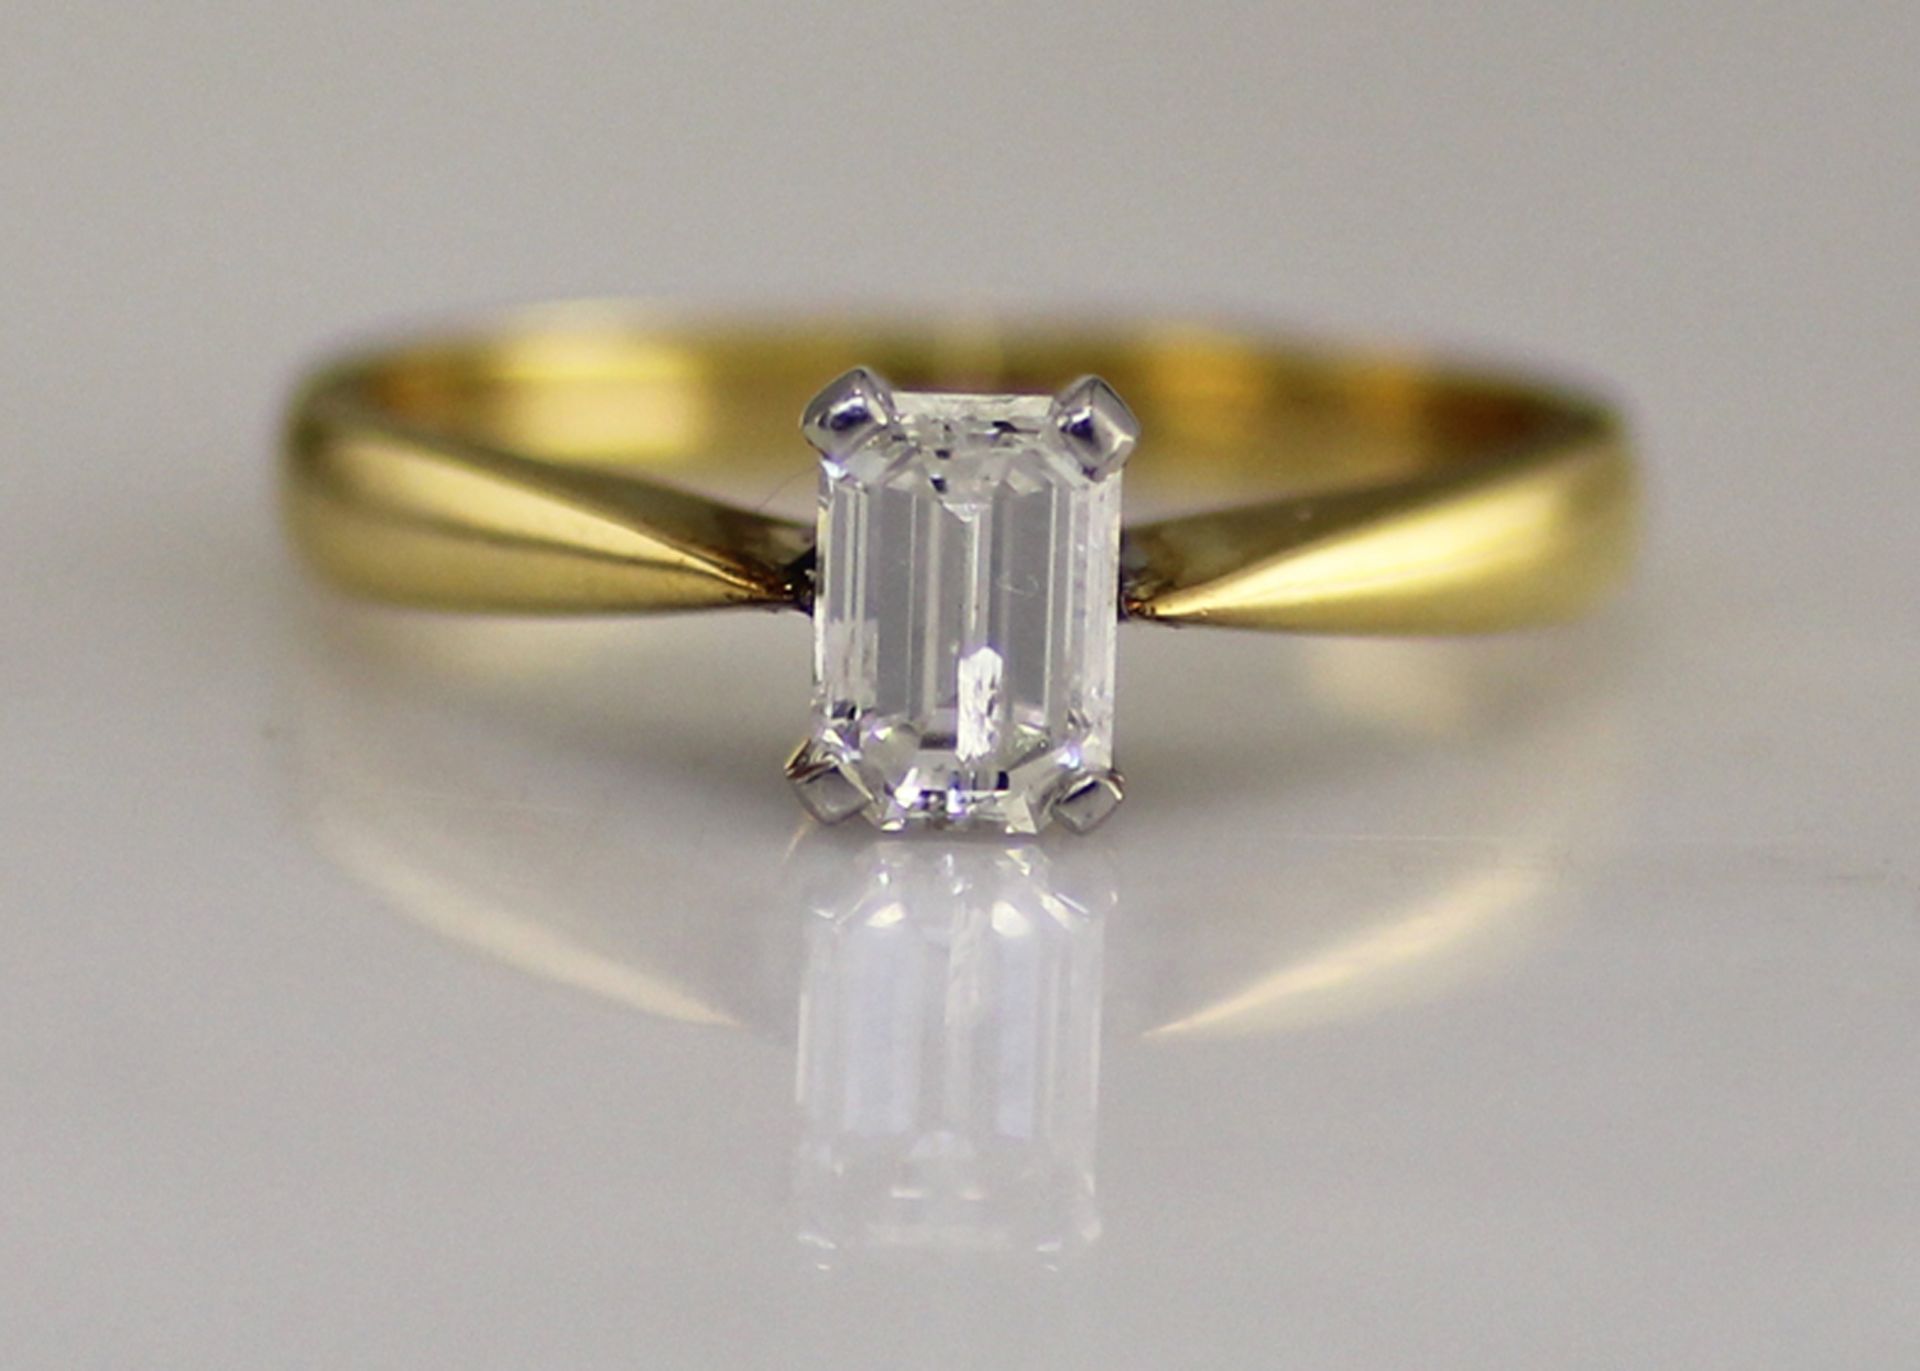 18ct Single Stone Emerald Cut Diamond Ring D SI3 0.72 Carats - Valued by GIE £11,495.00 - A stunning - Image 8 of 9